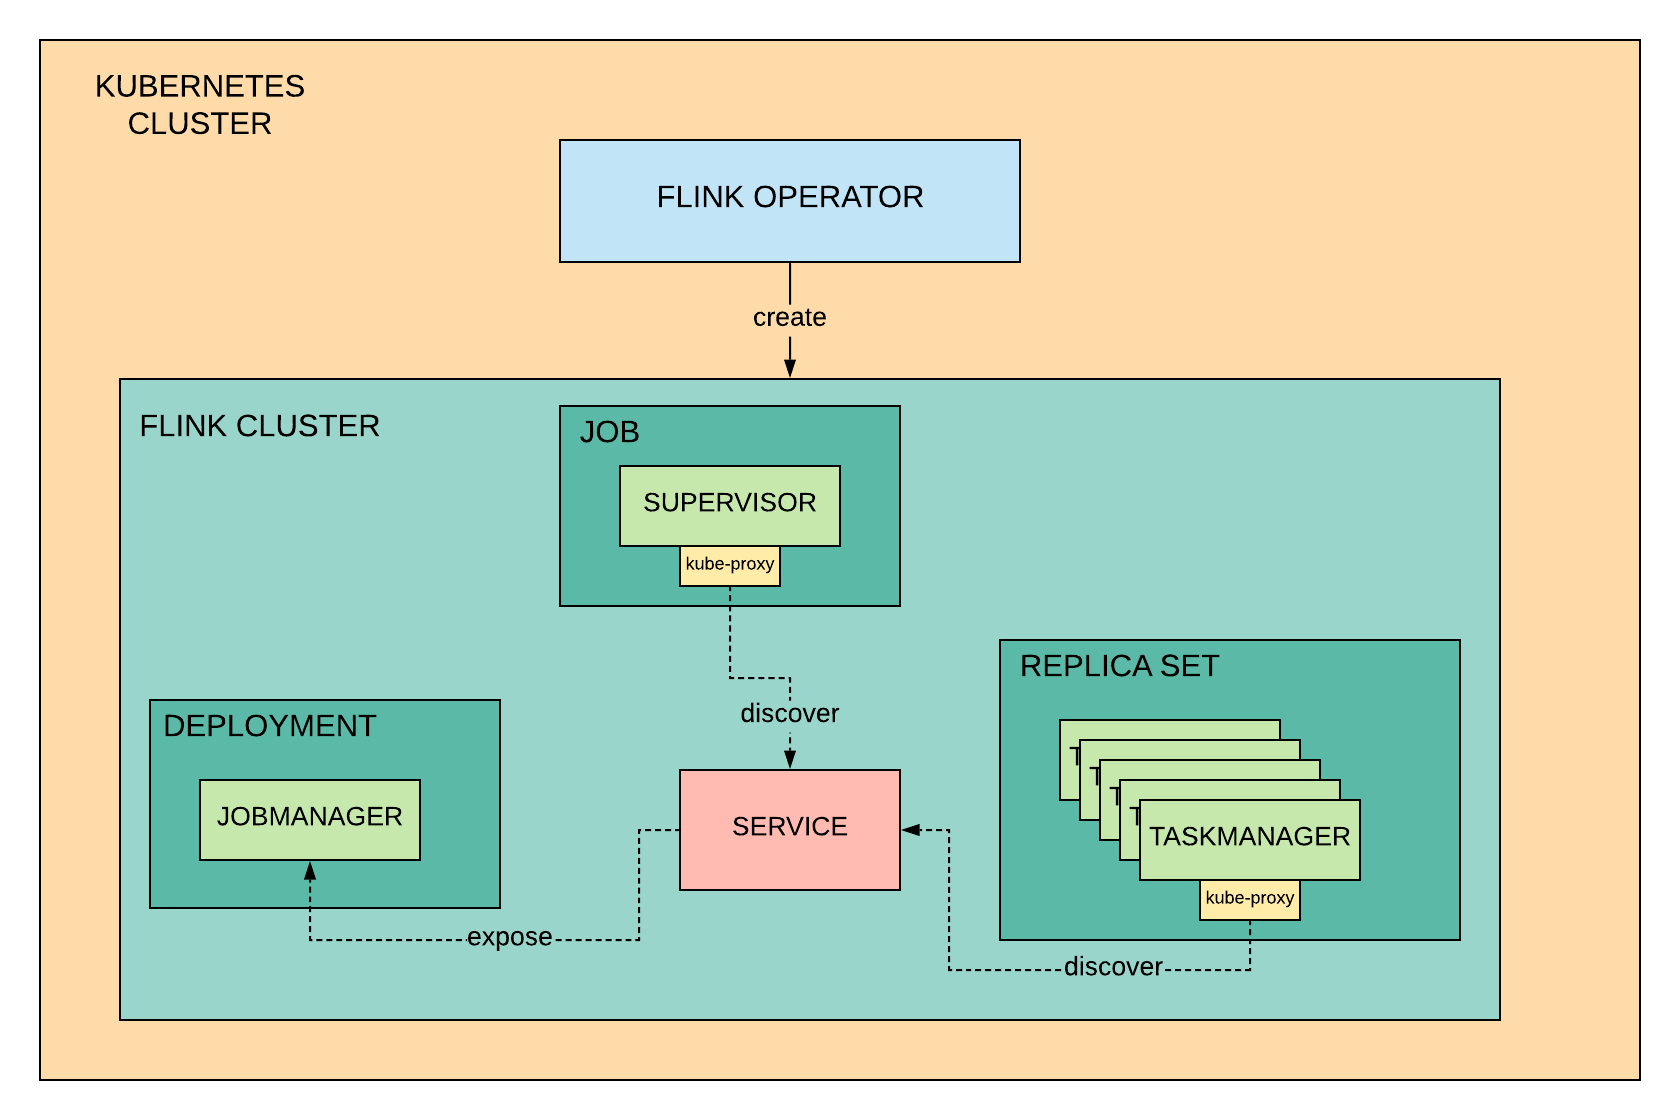 Components of a Flink PaaSTA cluster